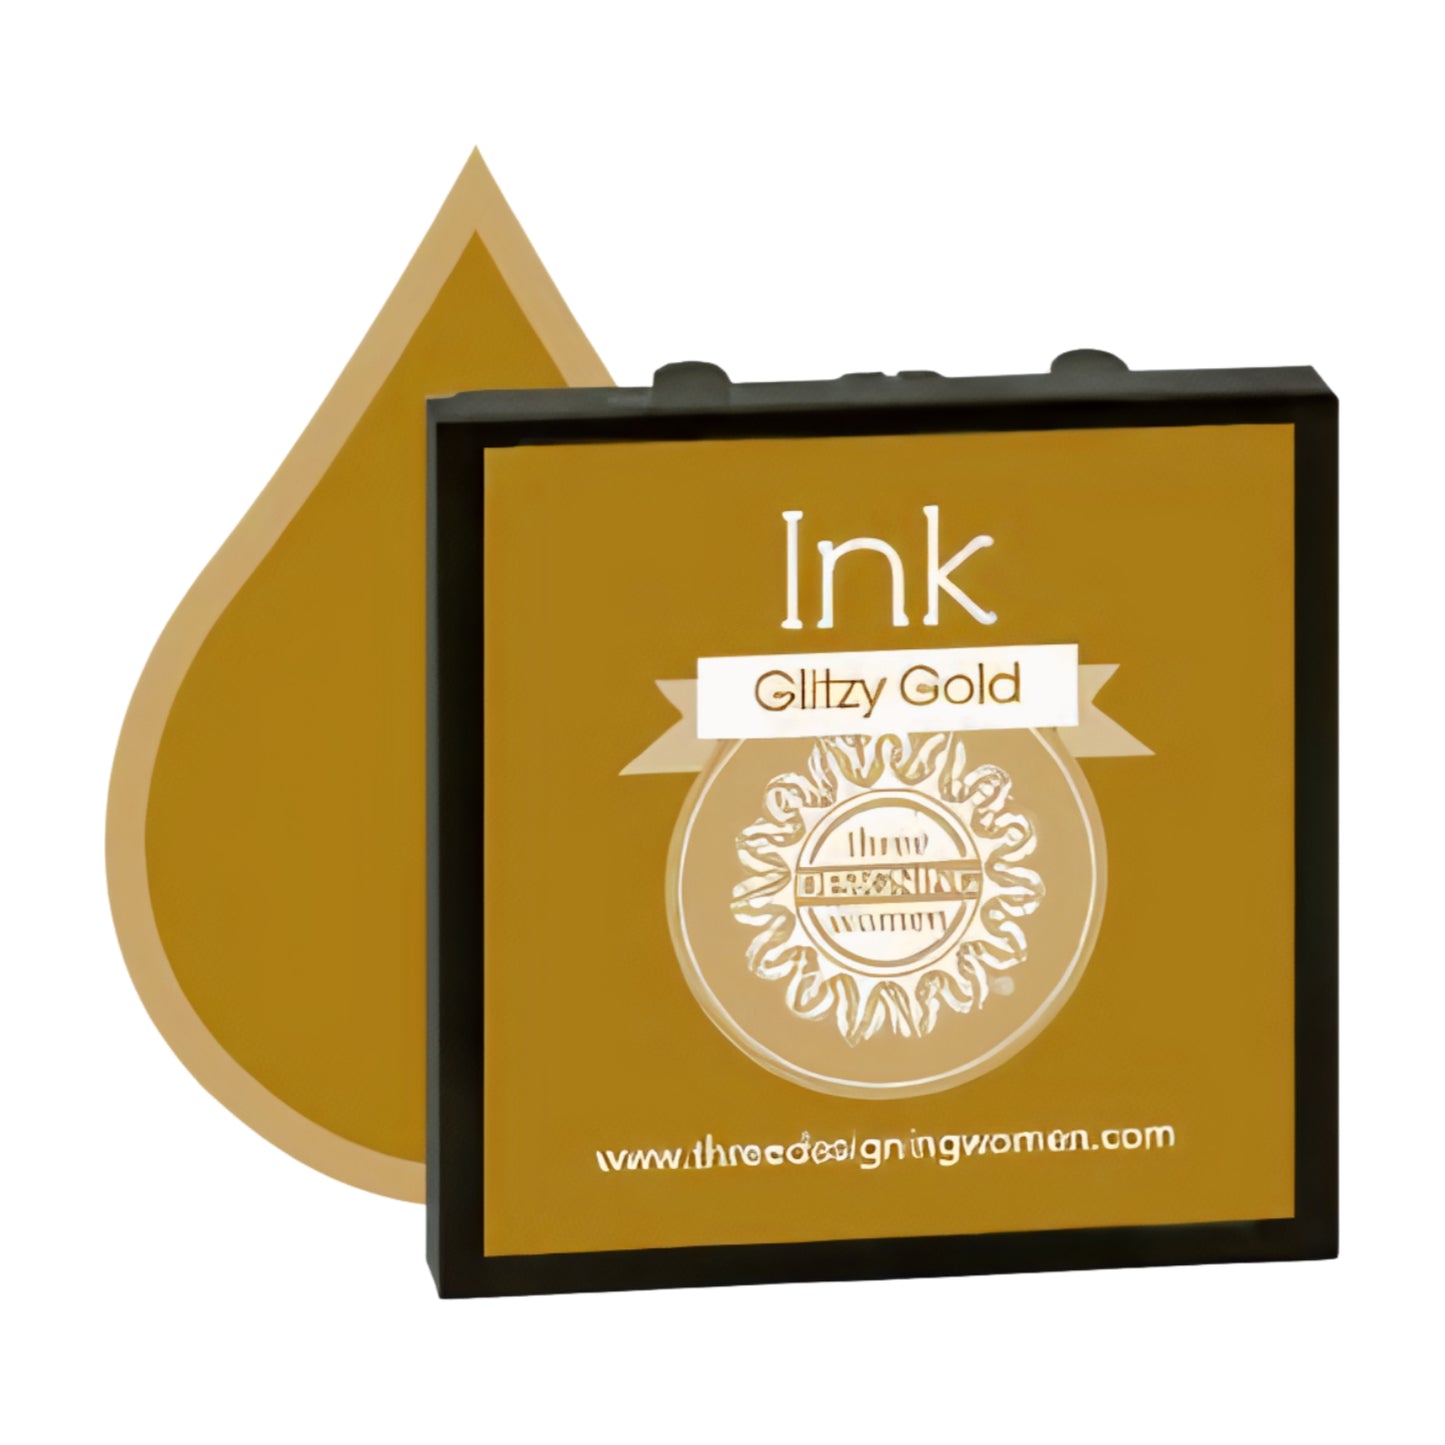 Ink Replacement Cartridge "Glitzy Gold" for Self-Inking Stampers Three Designing Women